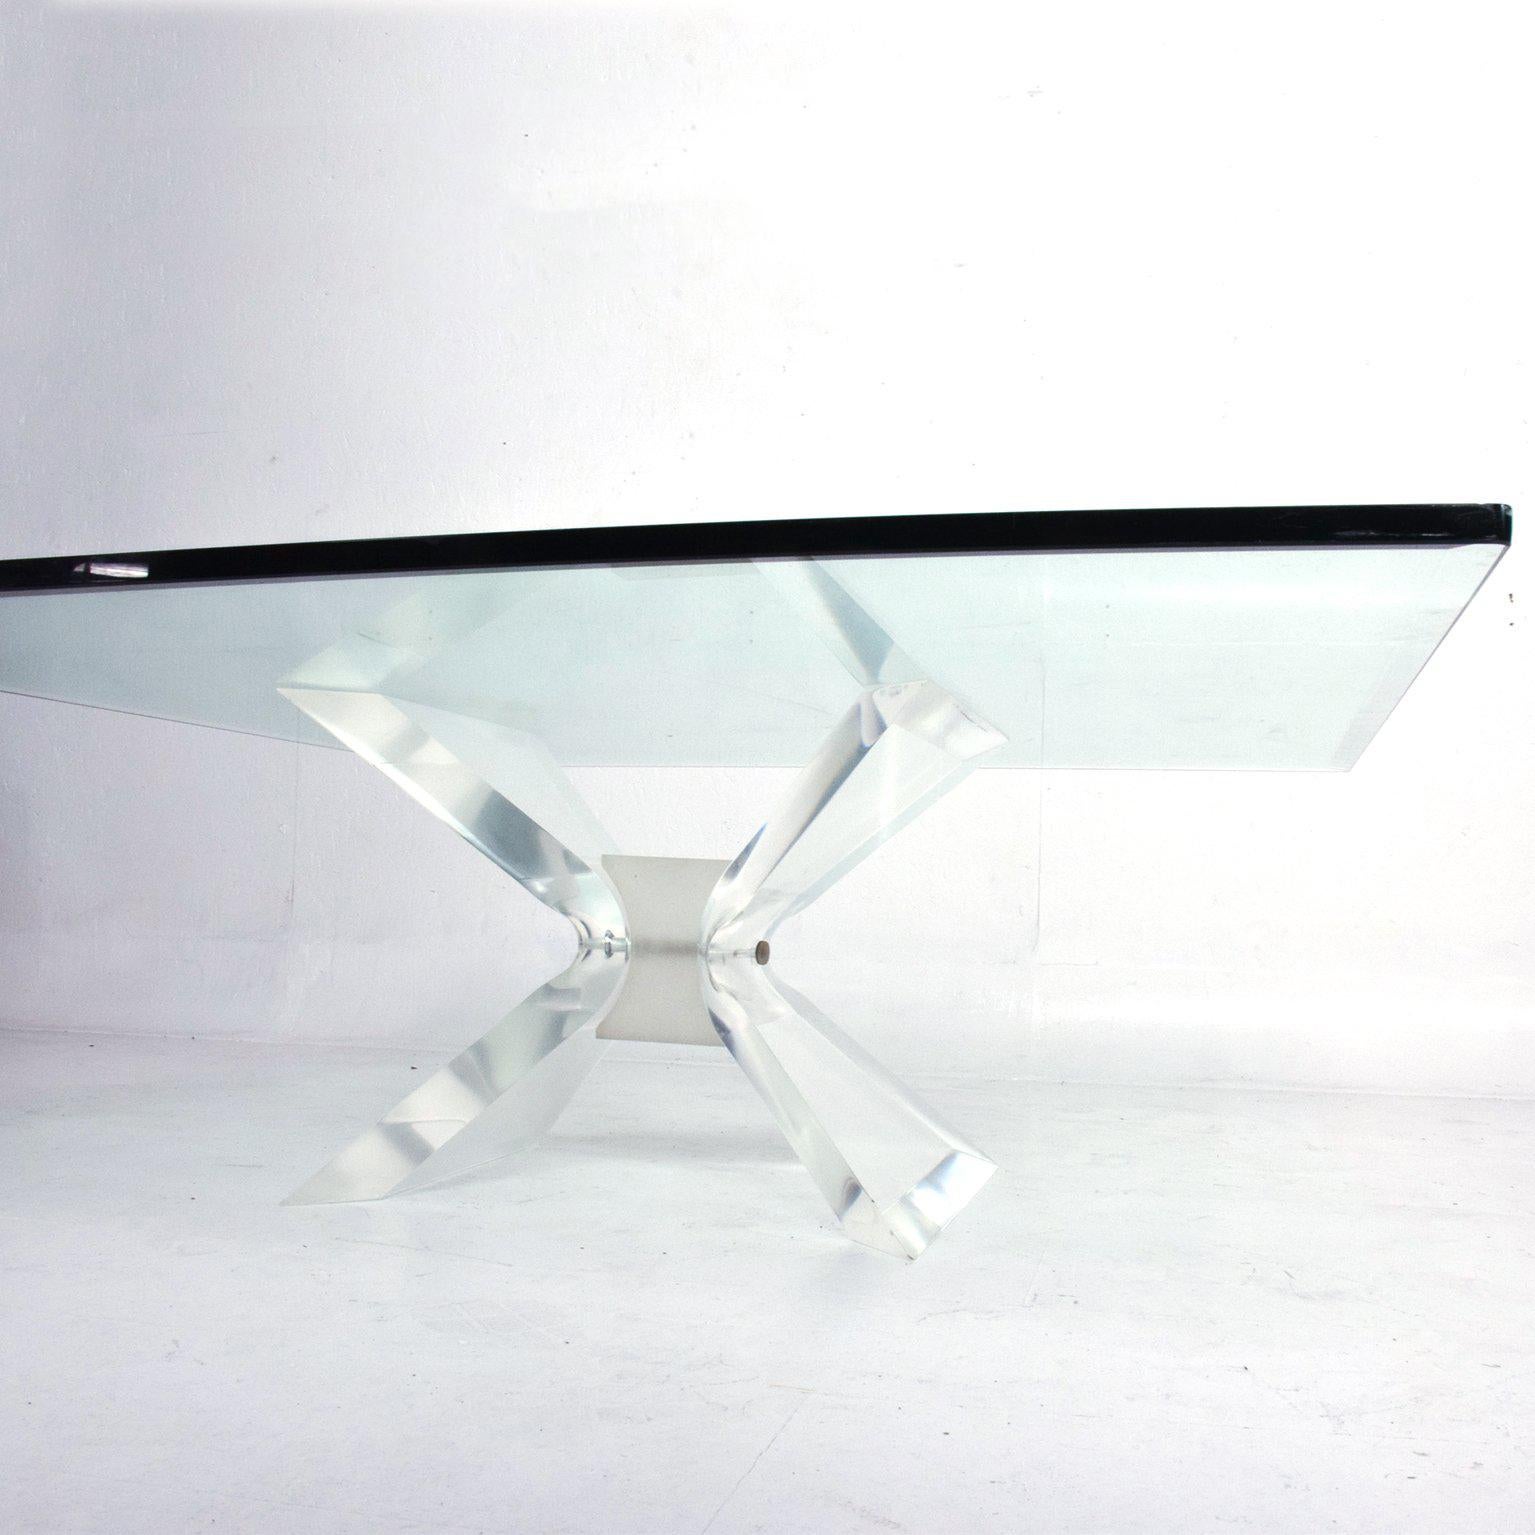 For your consideration: Lion in Frost Regency Coffee Table in Lucite and Glass by Leon Frost 1970s
Sculptural coffee table square cocktail table glass on sculptural X-form base.
Thick glass top.
41.75 x 41.75 x 16 tall.
Glass .75 thick.
Original